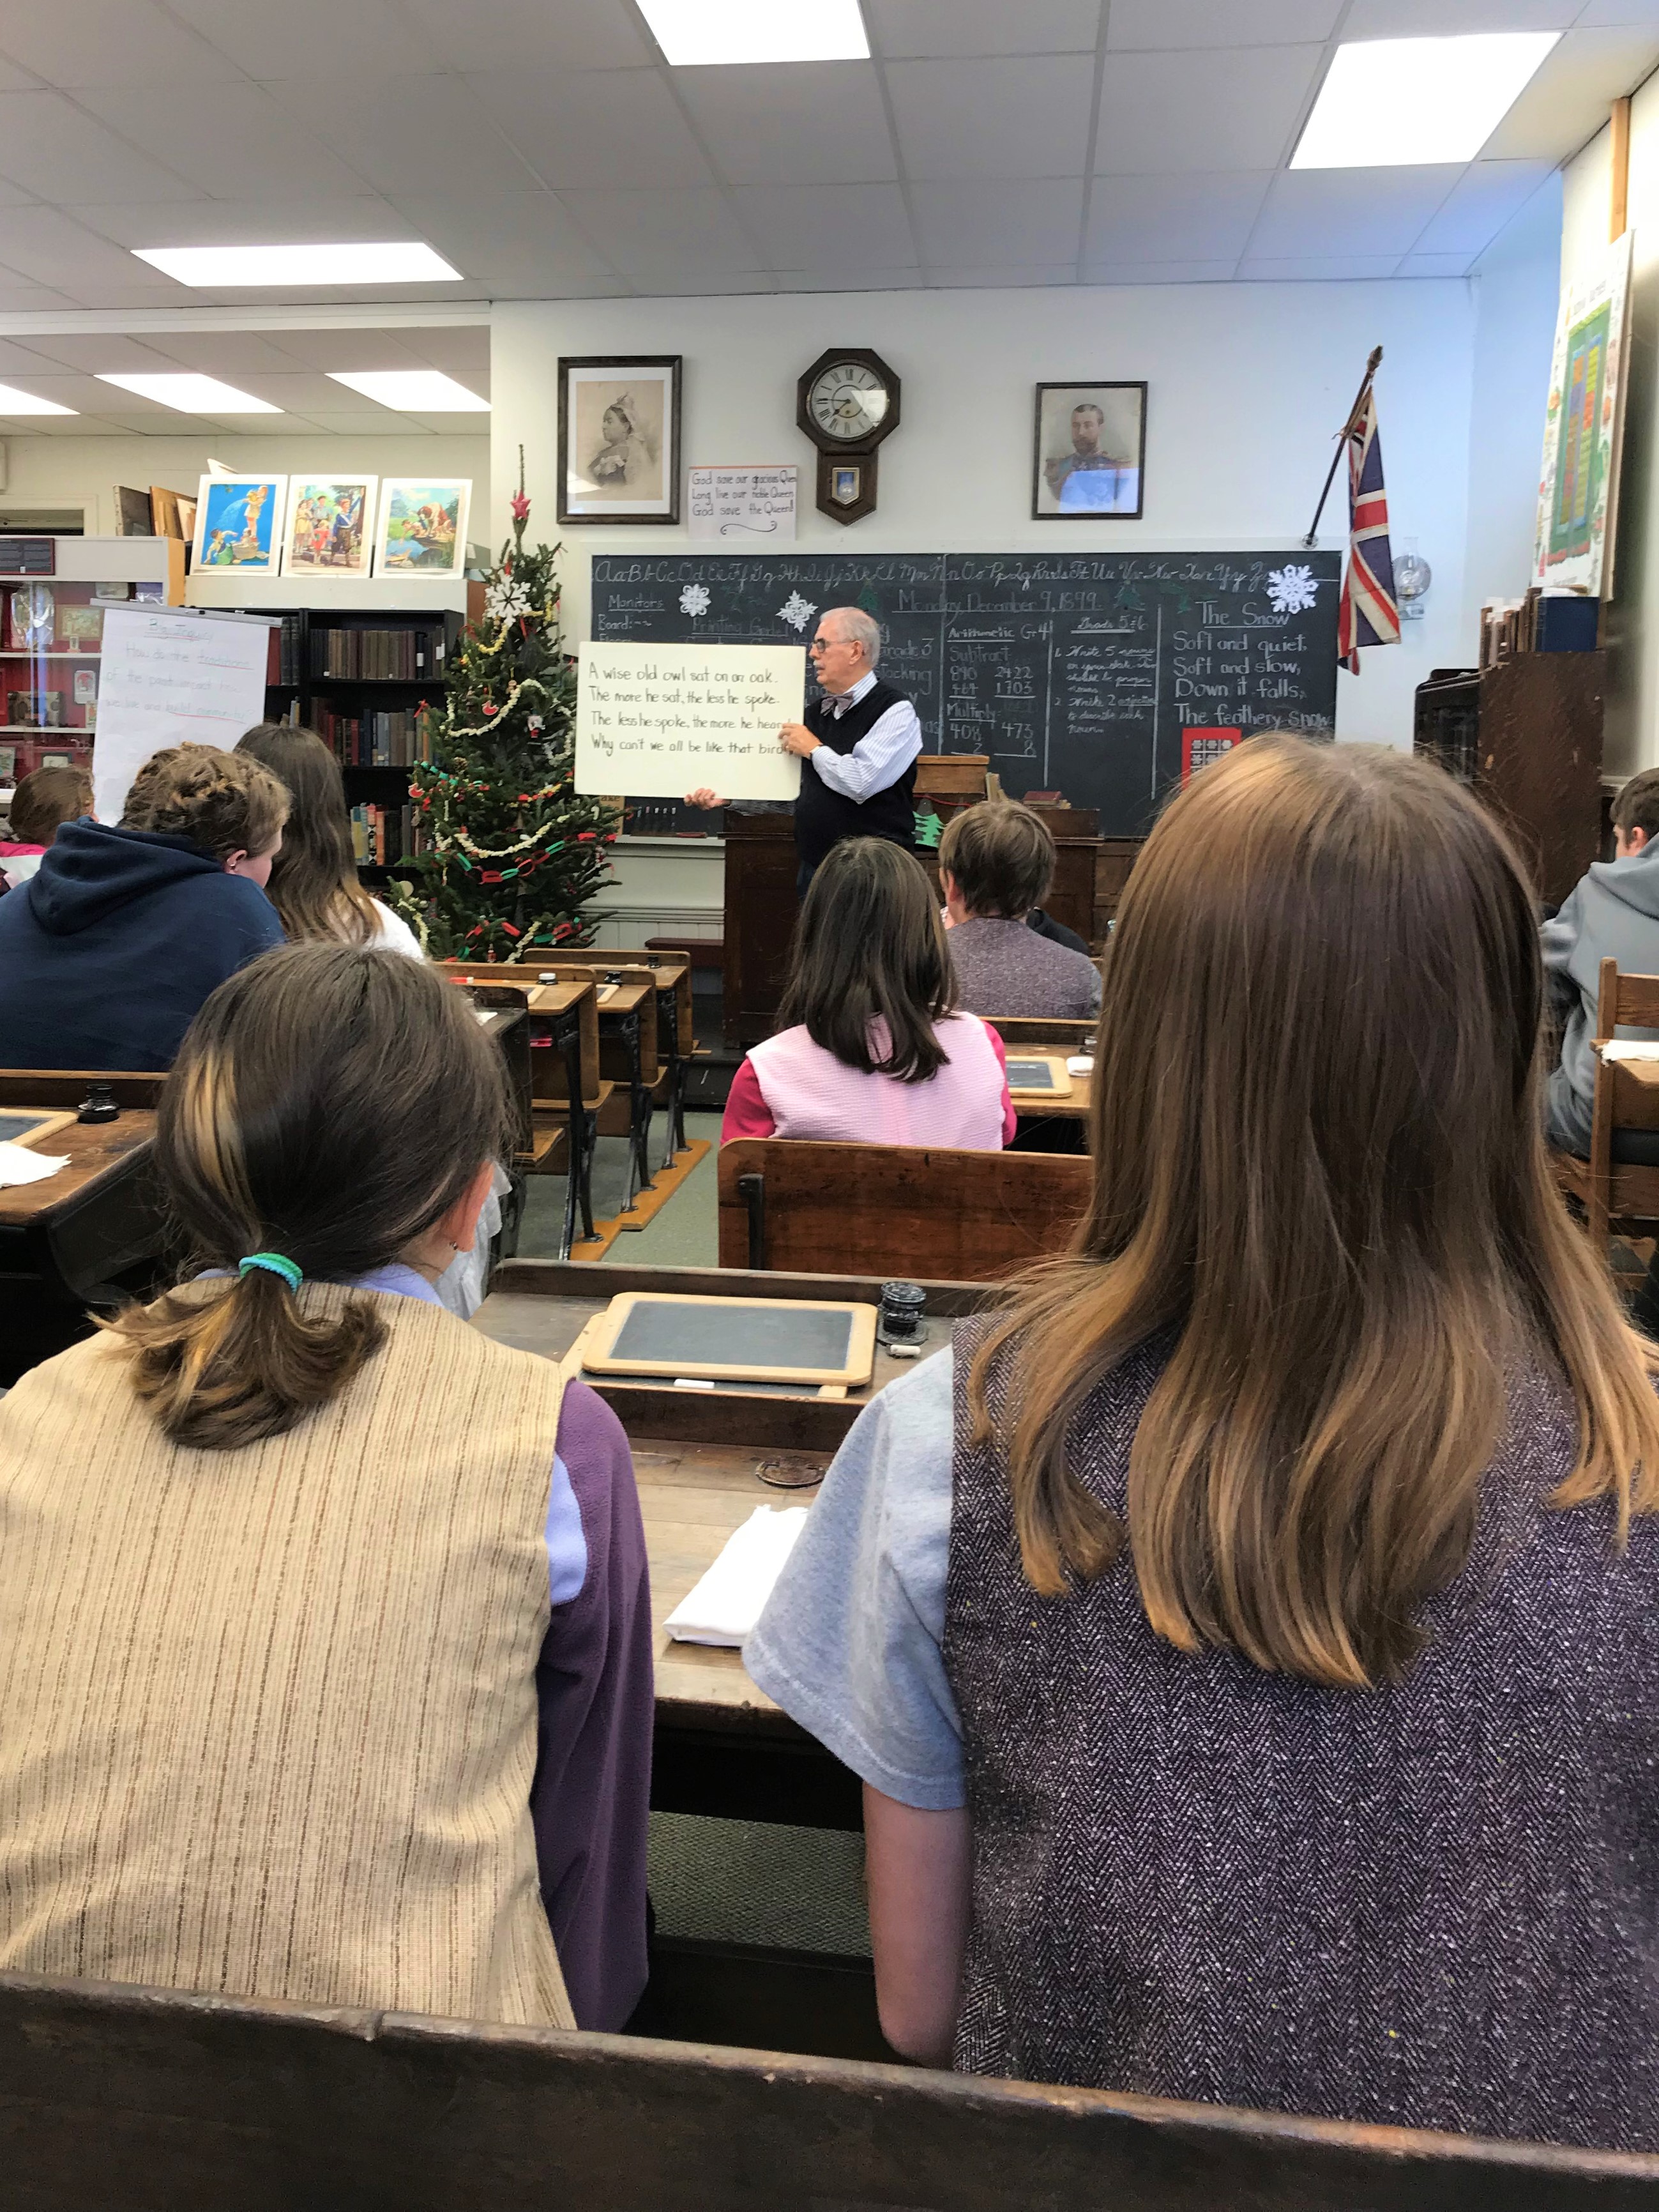 Beyond Classrooms at the Frontenac County Schools Museum